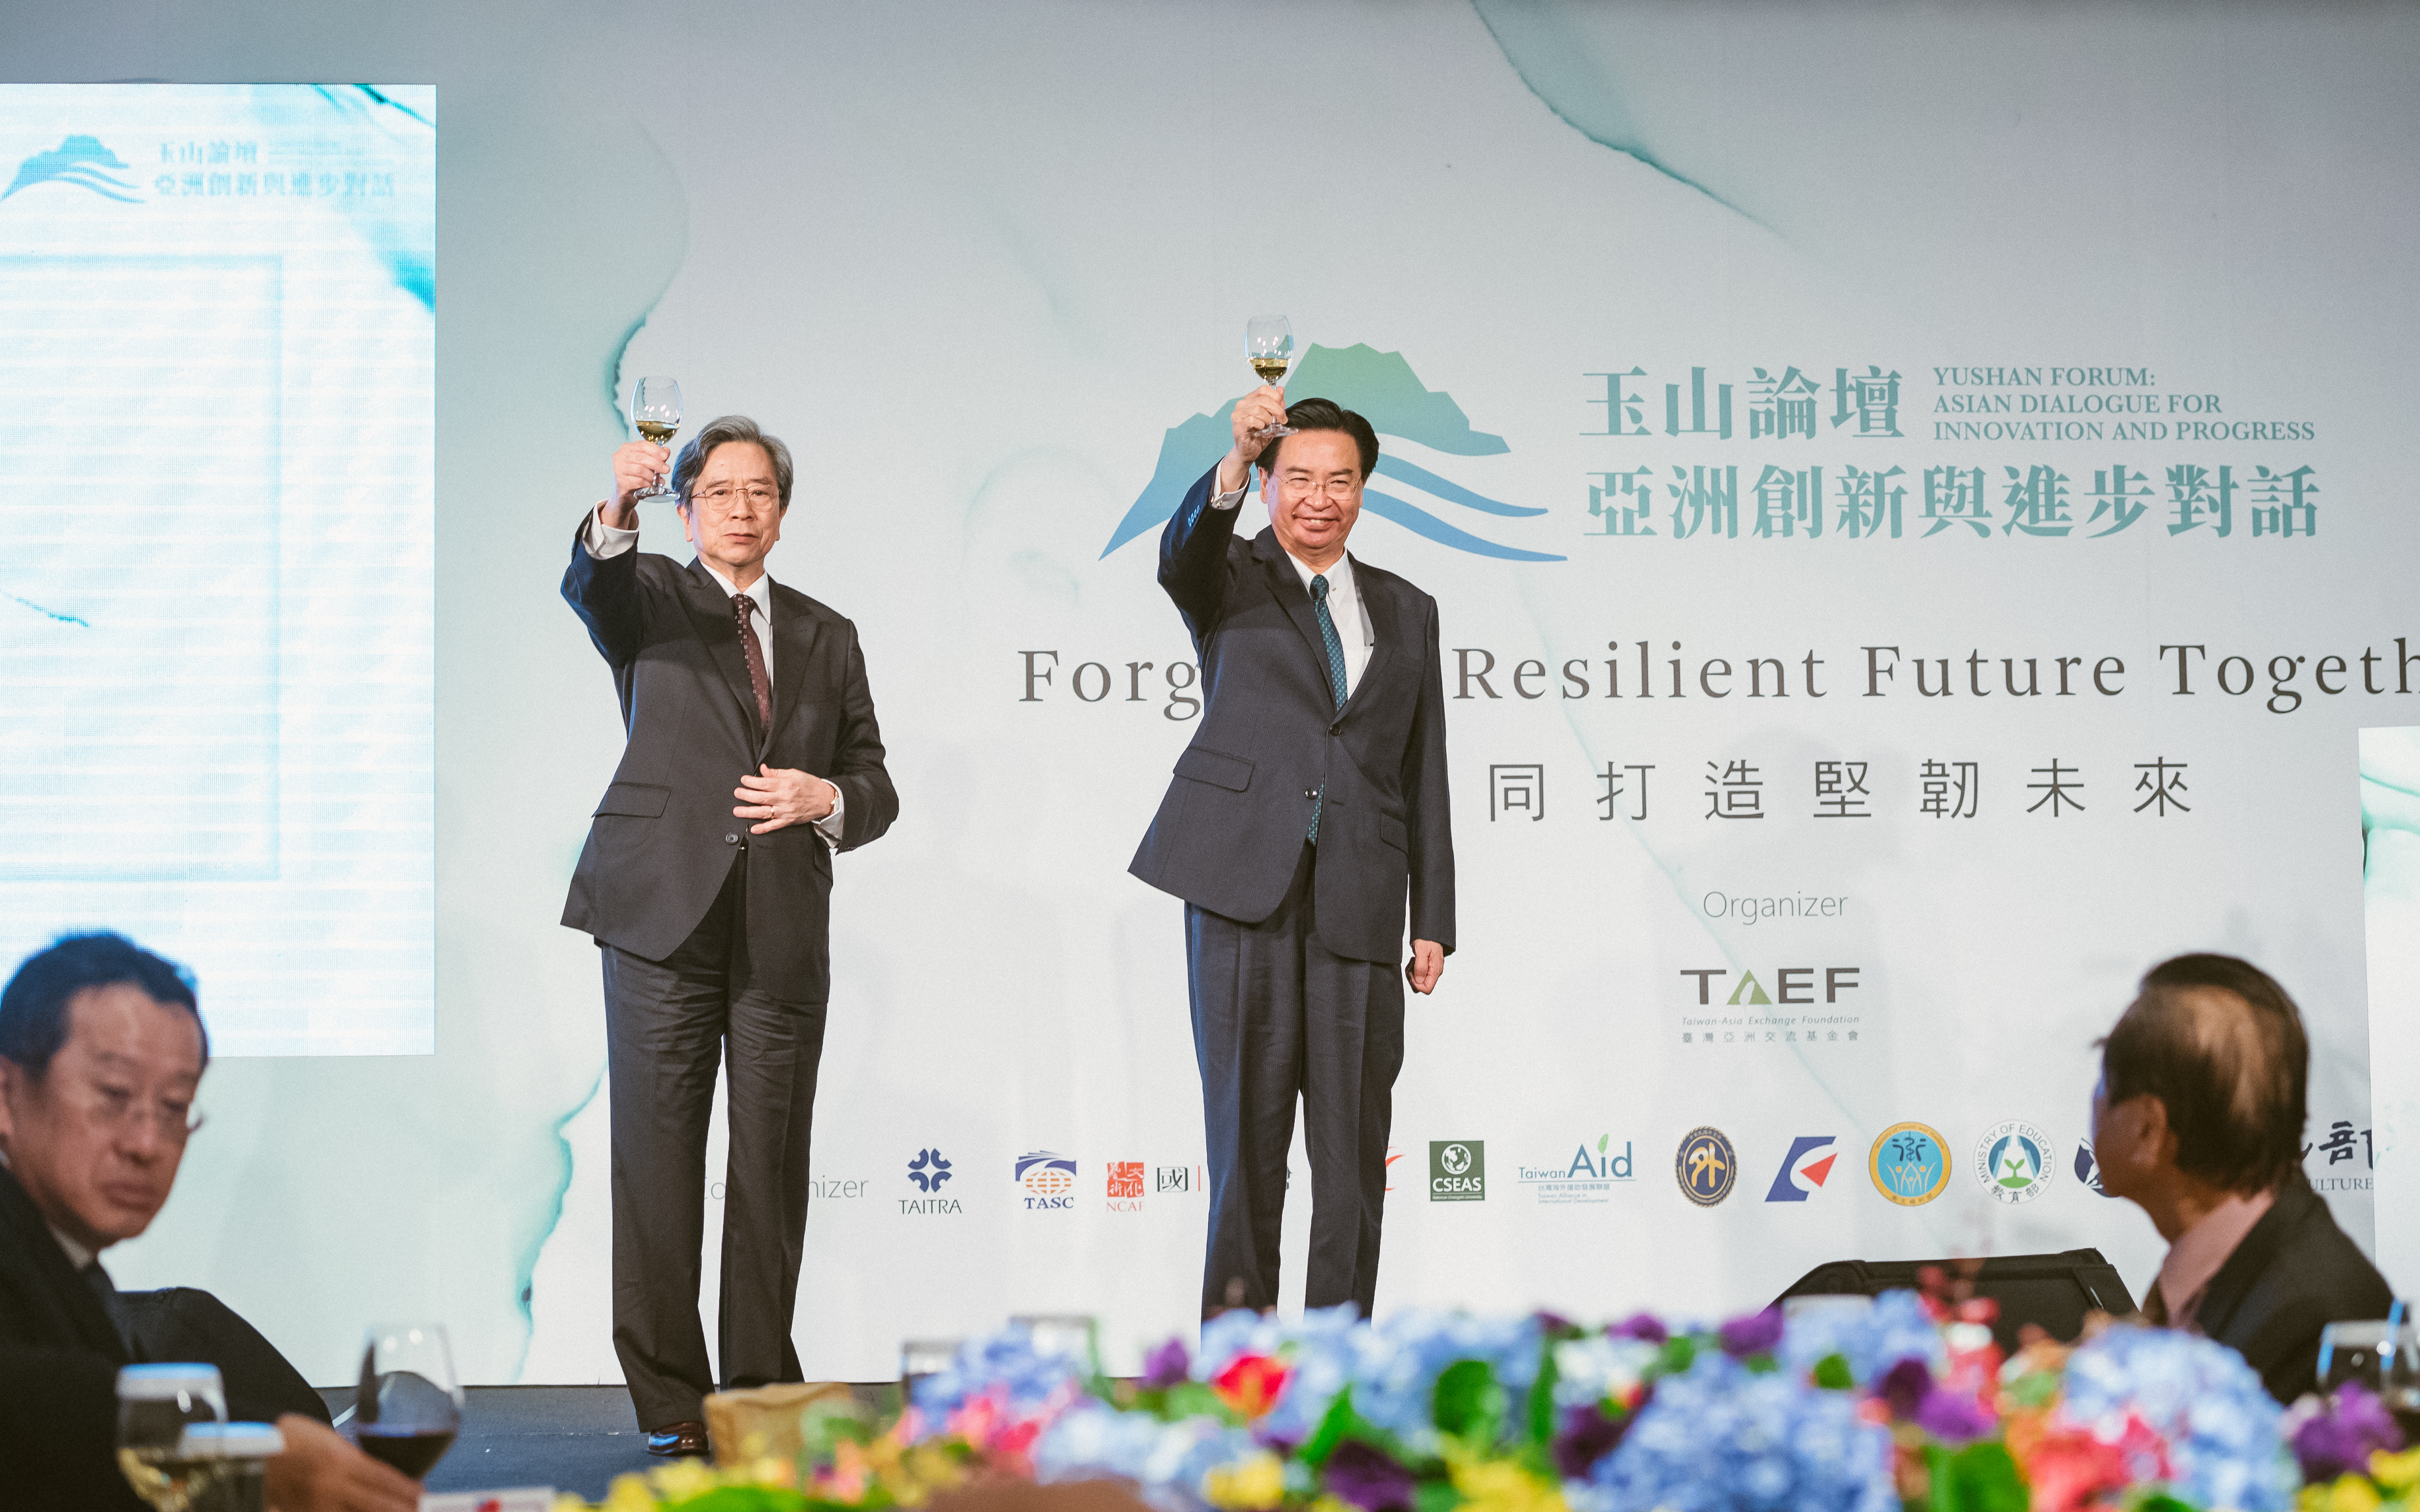 Toasted by Joseph Wu, Minister of Foreign Affairs and H.H. Michael Hsiao, Chairman of TAEF